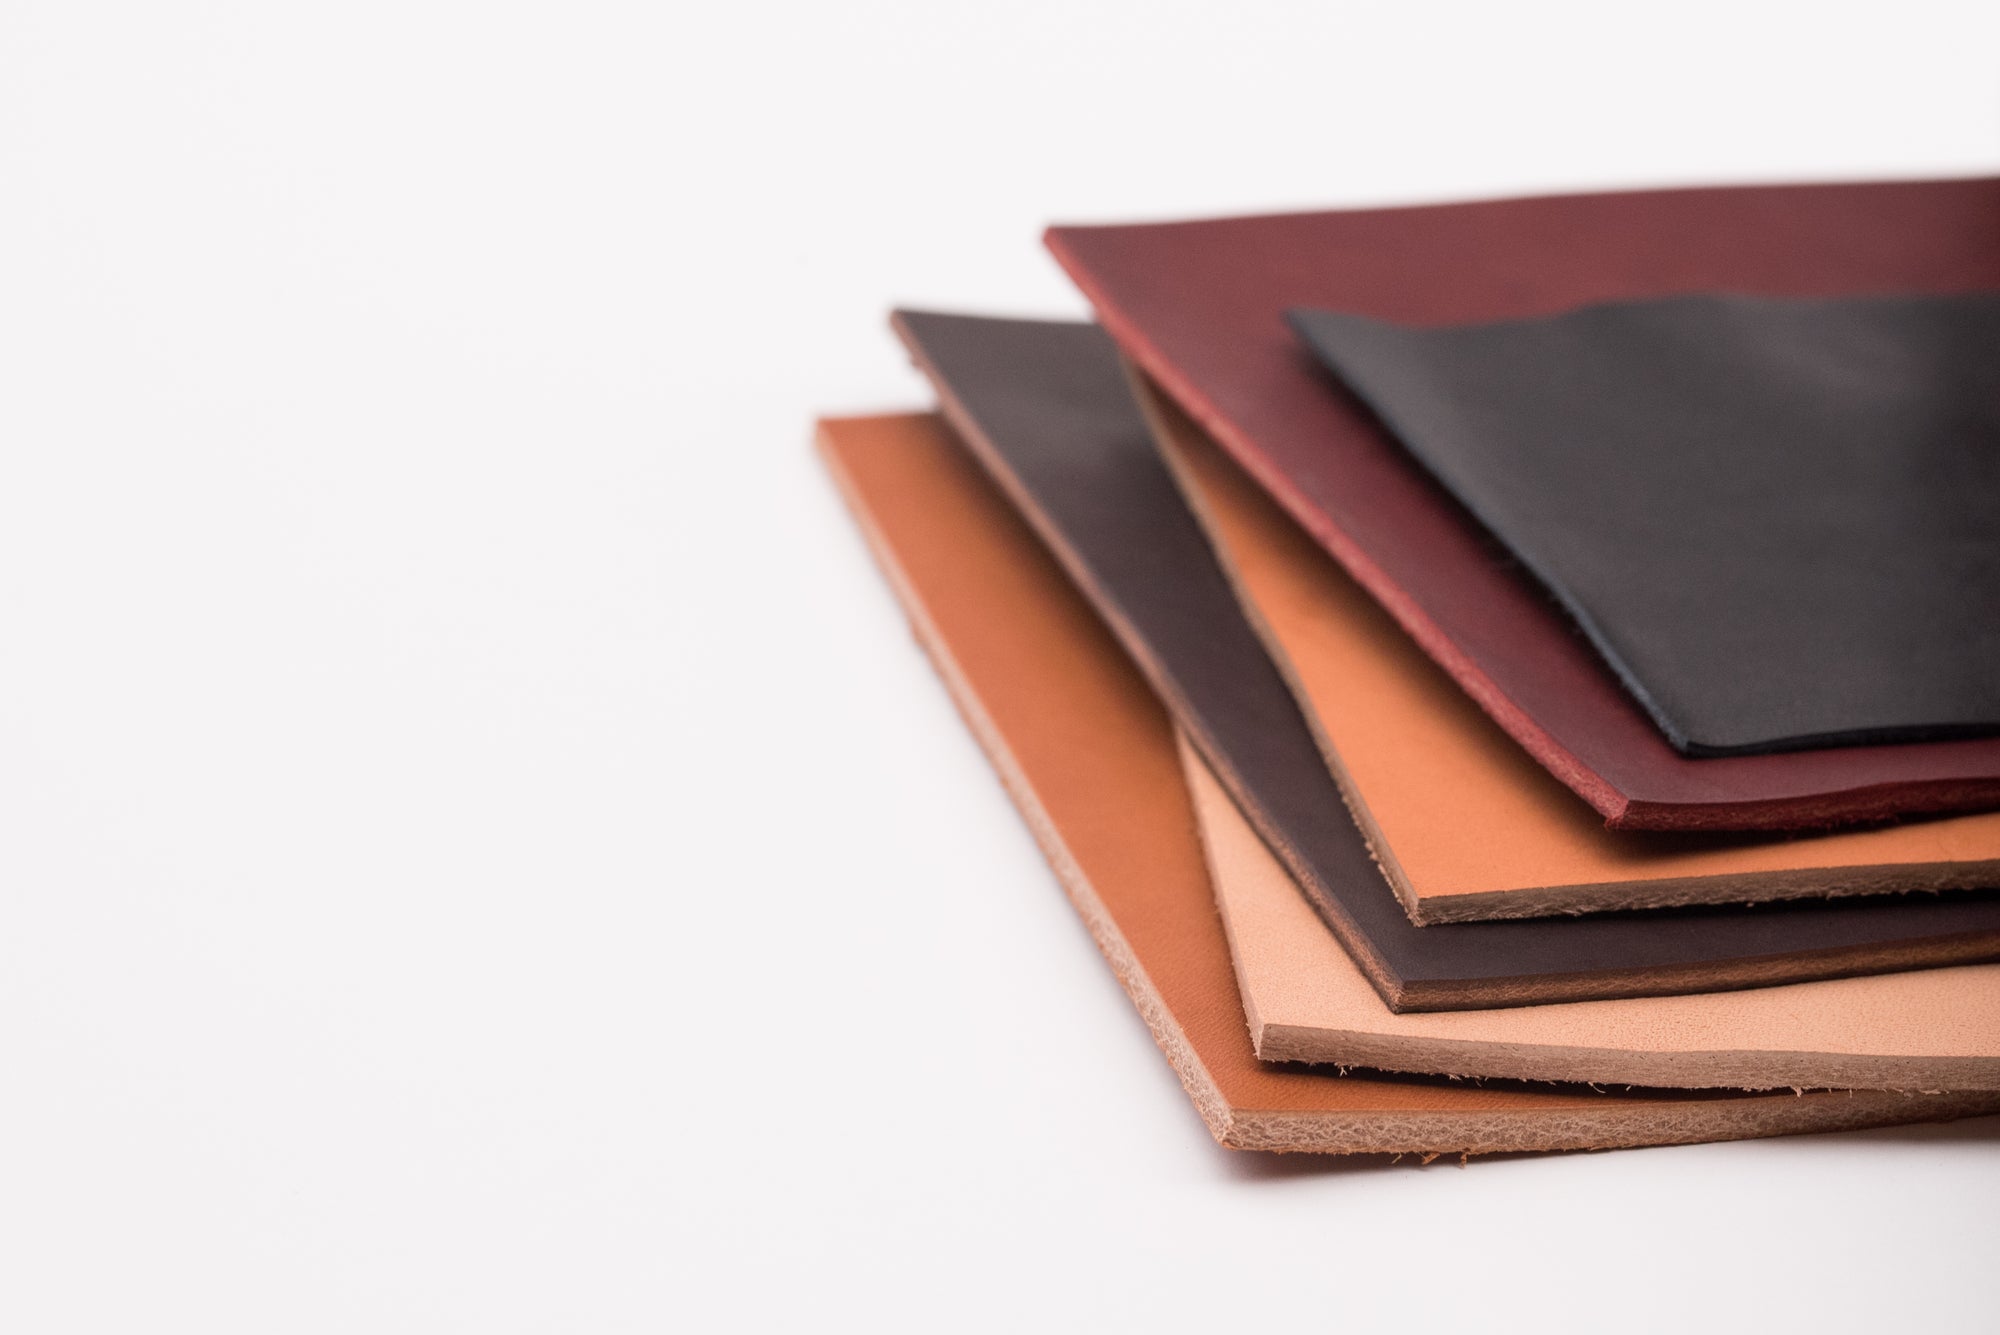 Kinds of leather by tanning process (veg-tan vs chrome-tan)